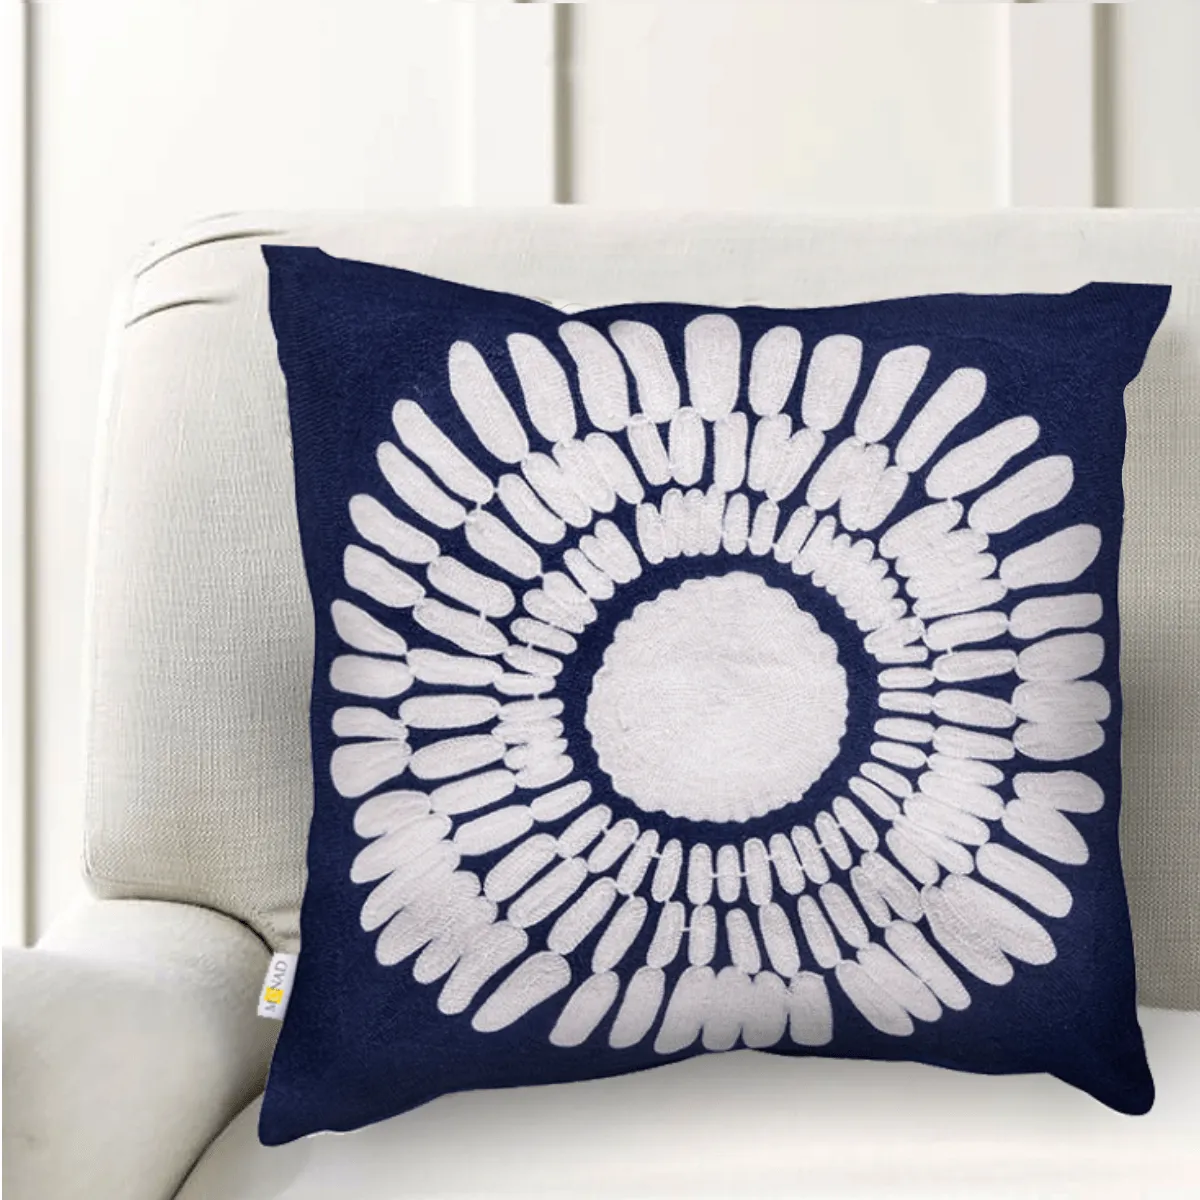 Blue Hodeco Embroidered Cushion Cover